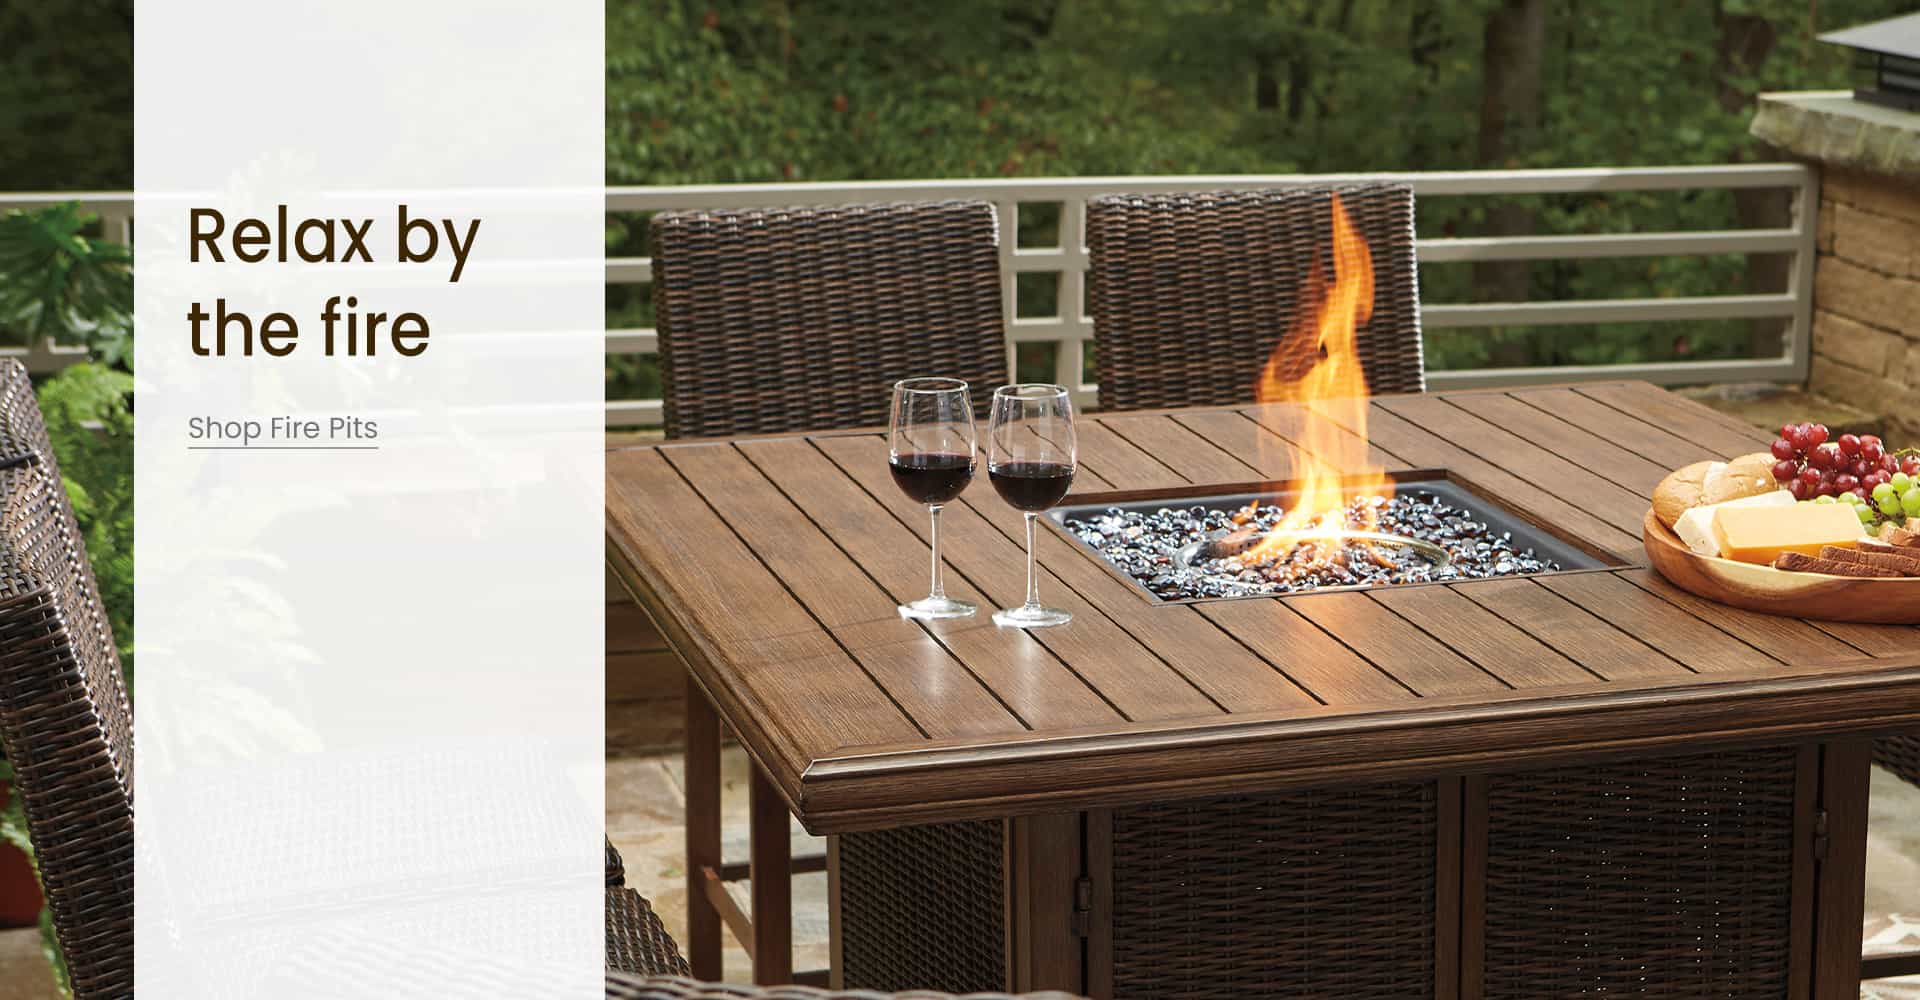 Relax by the fire Shop Fire Pits